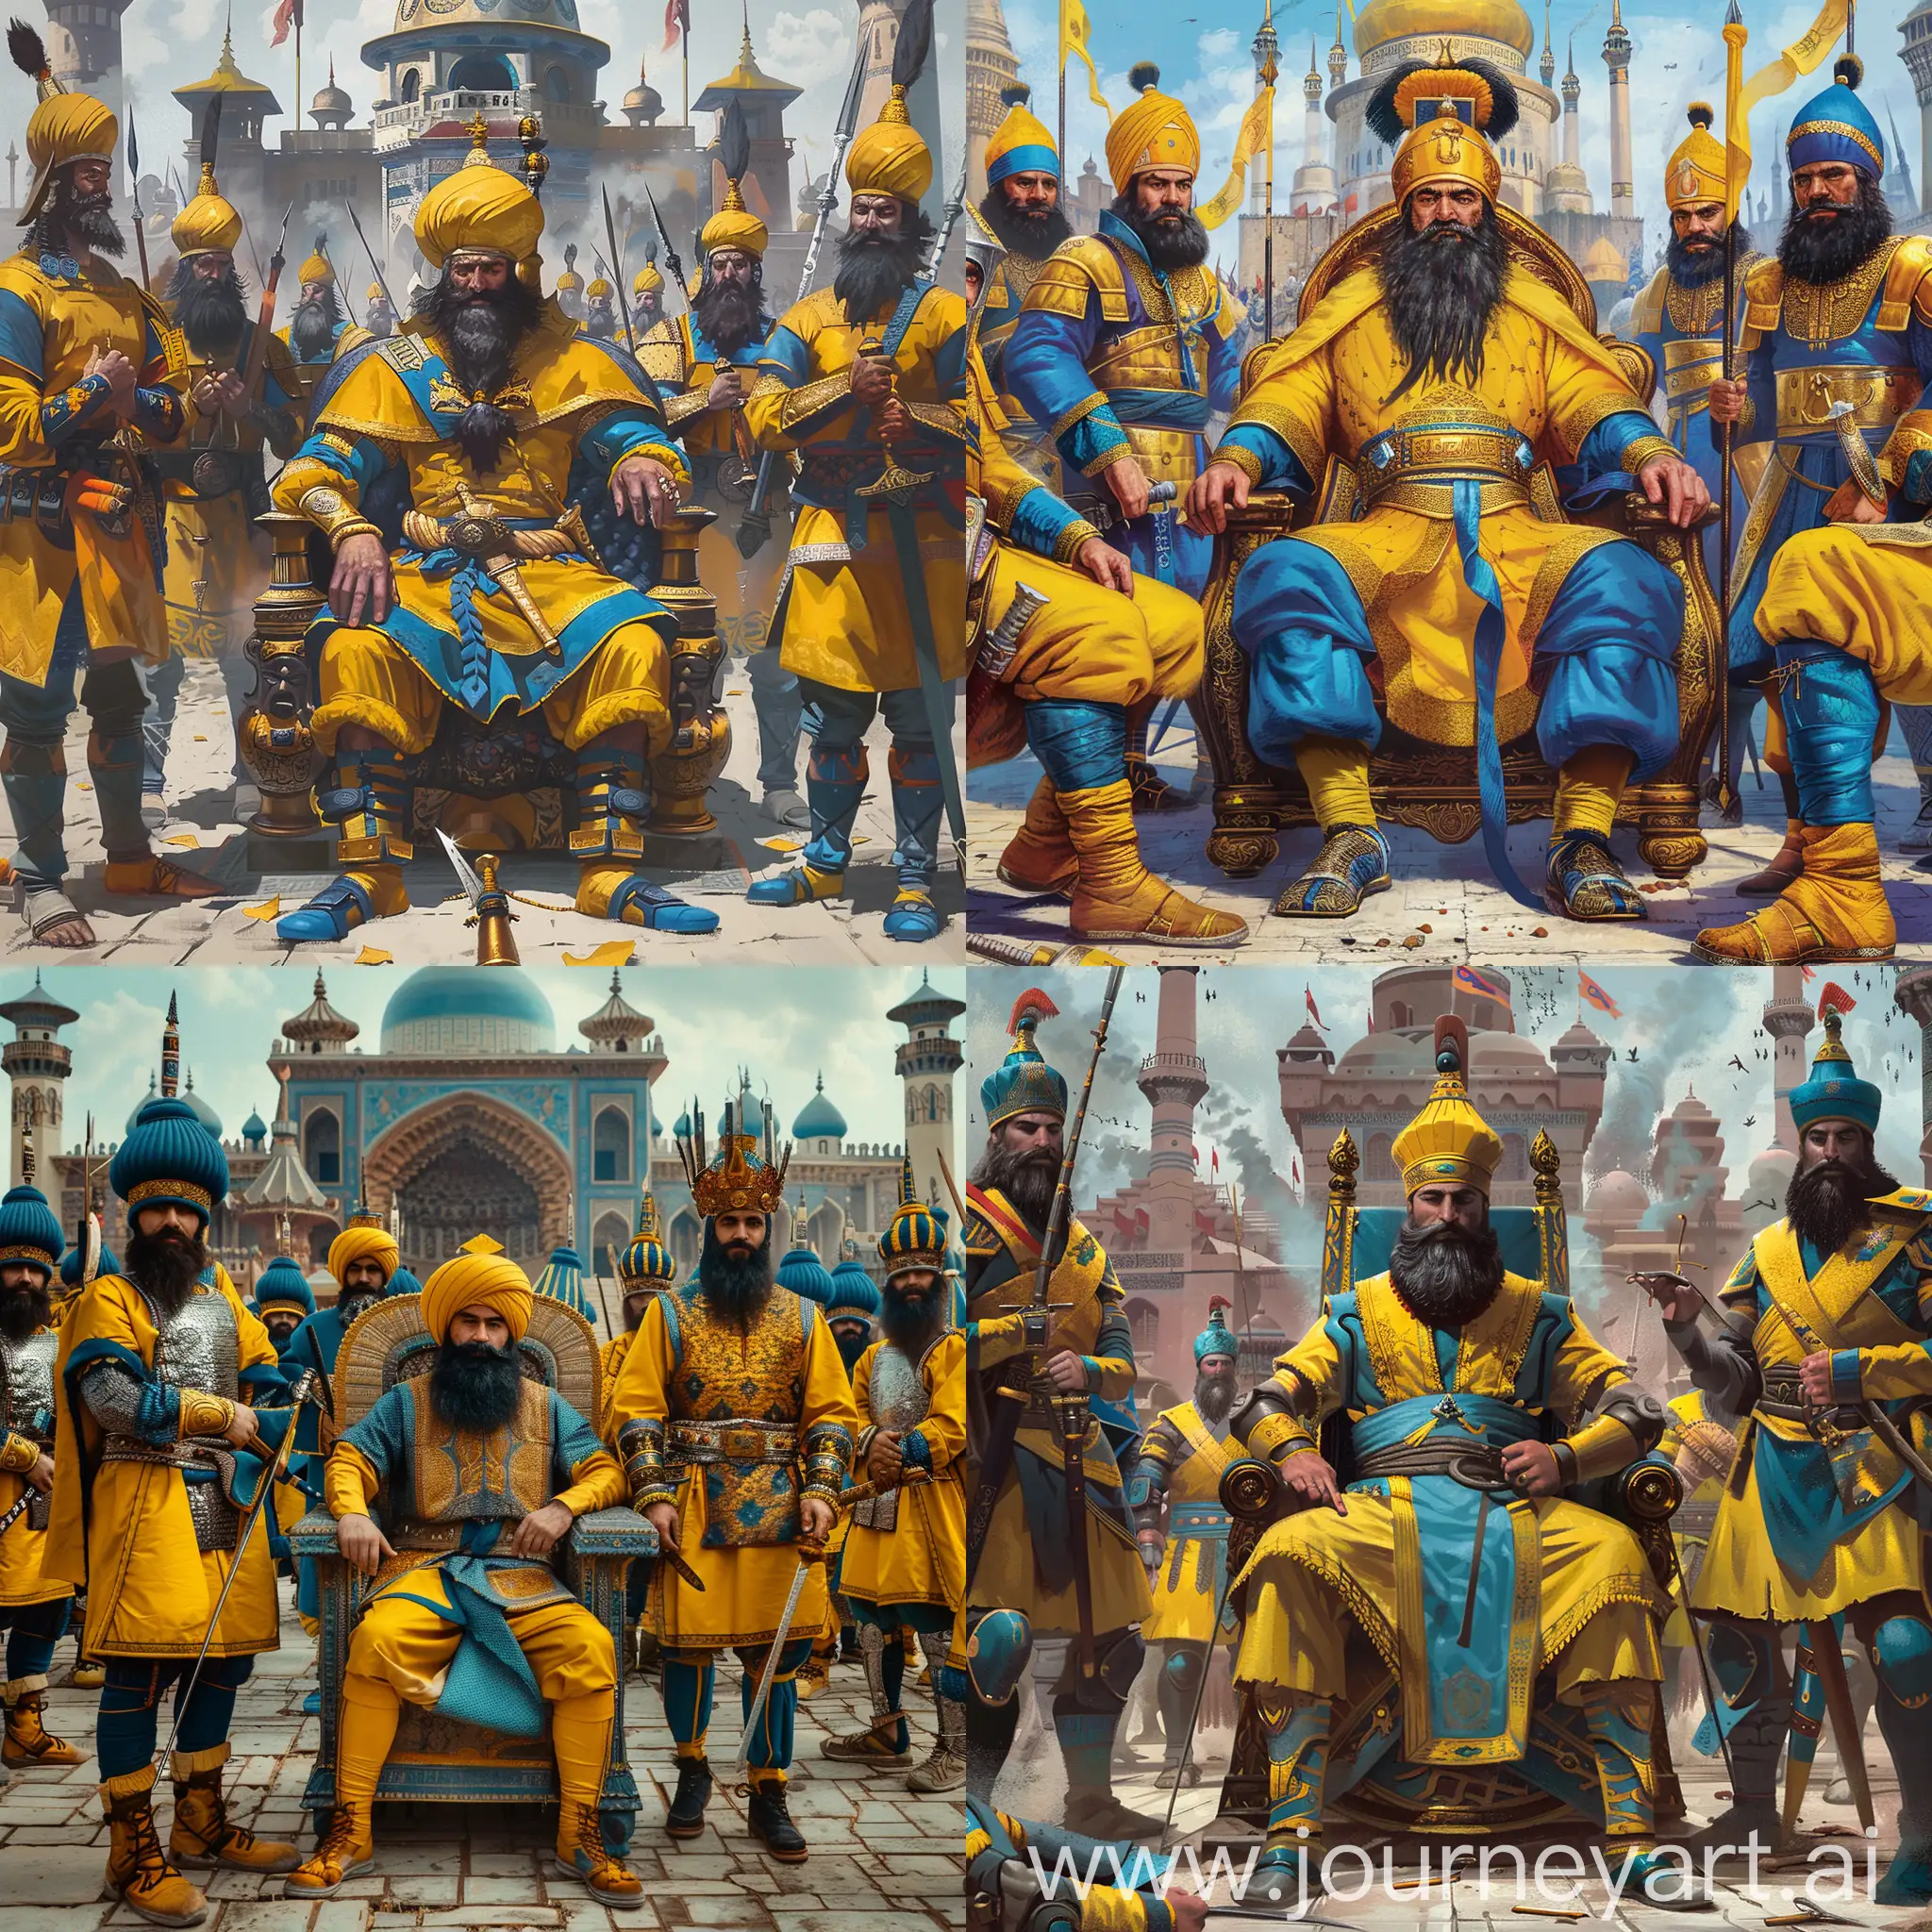 a middle-aged ancient Seljuk sultan is sitting on his imperial throne in the middle, he has black Seljuk style beard, yellow-blue Seljuk hat and costume,

other Seljuk warriors are in yellow and blue color armor, they hold swords or spears in hands, they have Seljuk hat and black beard, they stand around the sultan, with shoes,

they are all before an Seljuk palace, other Seljuk temples as background,